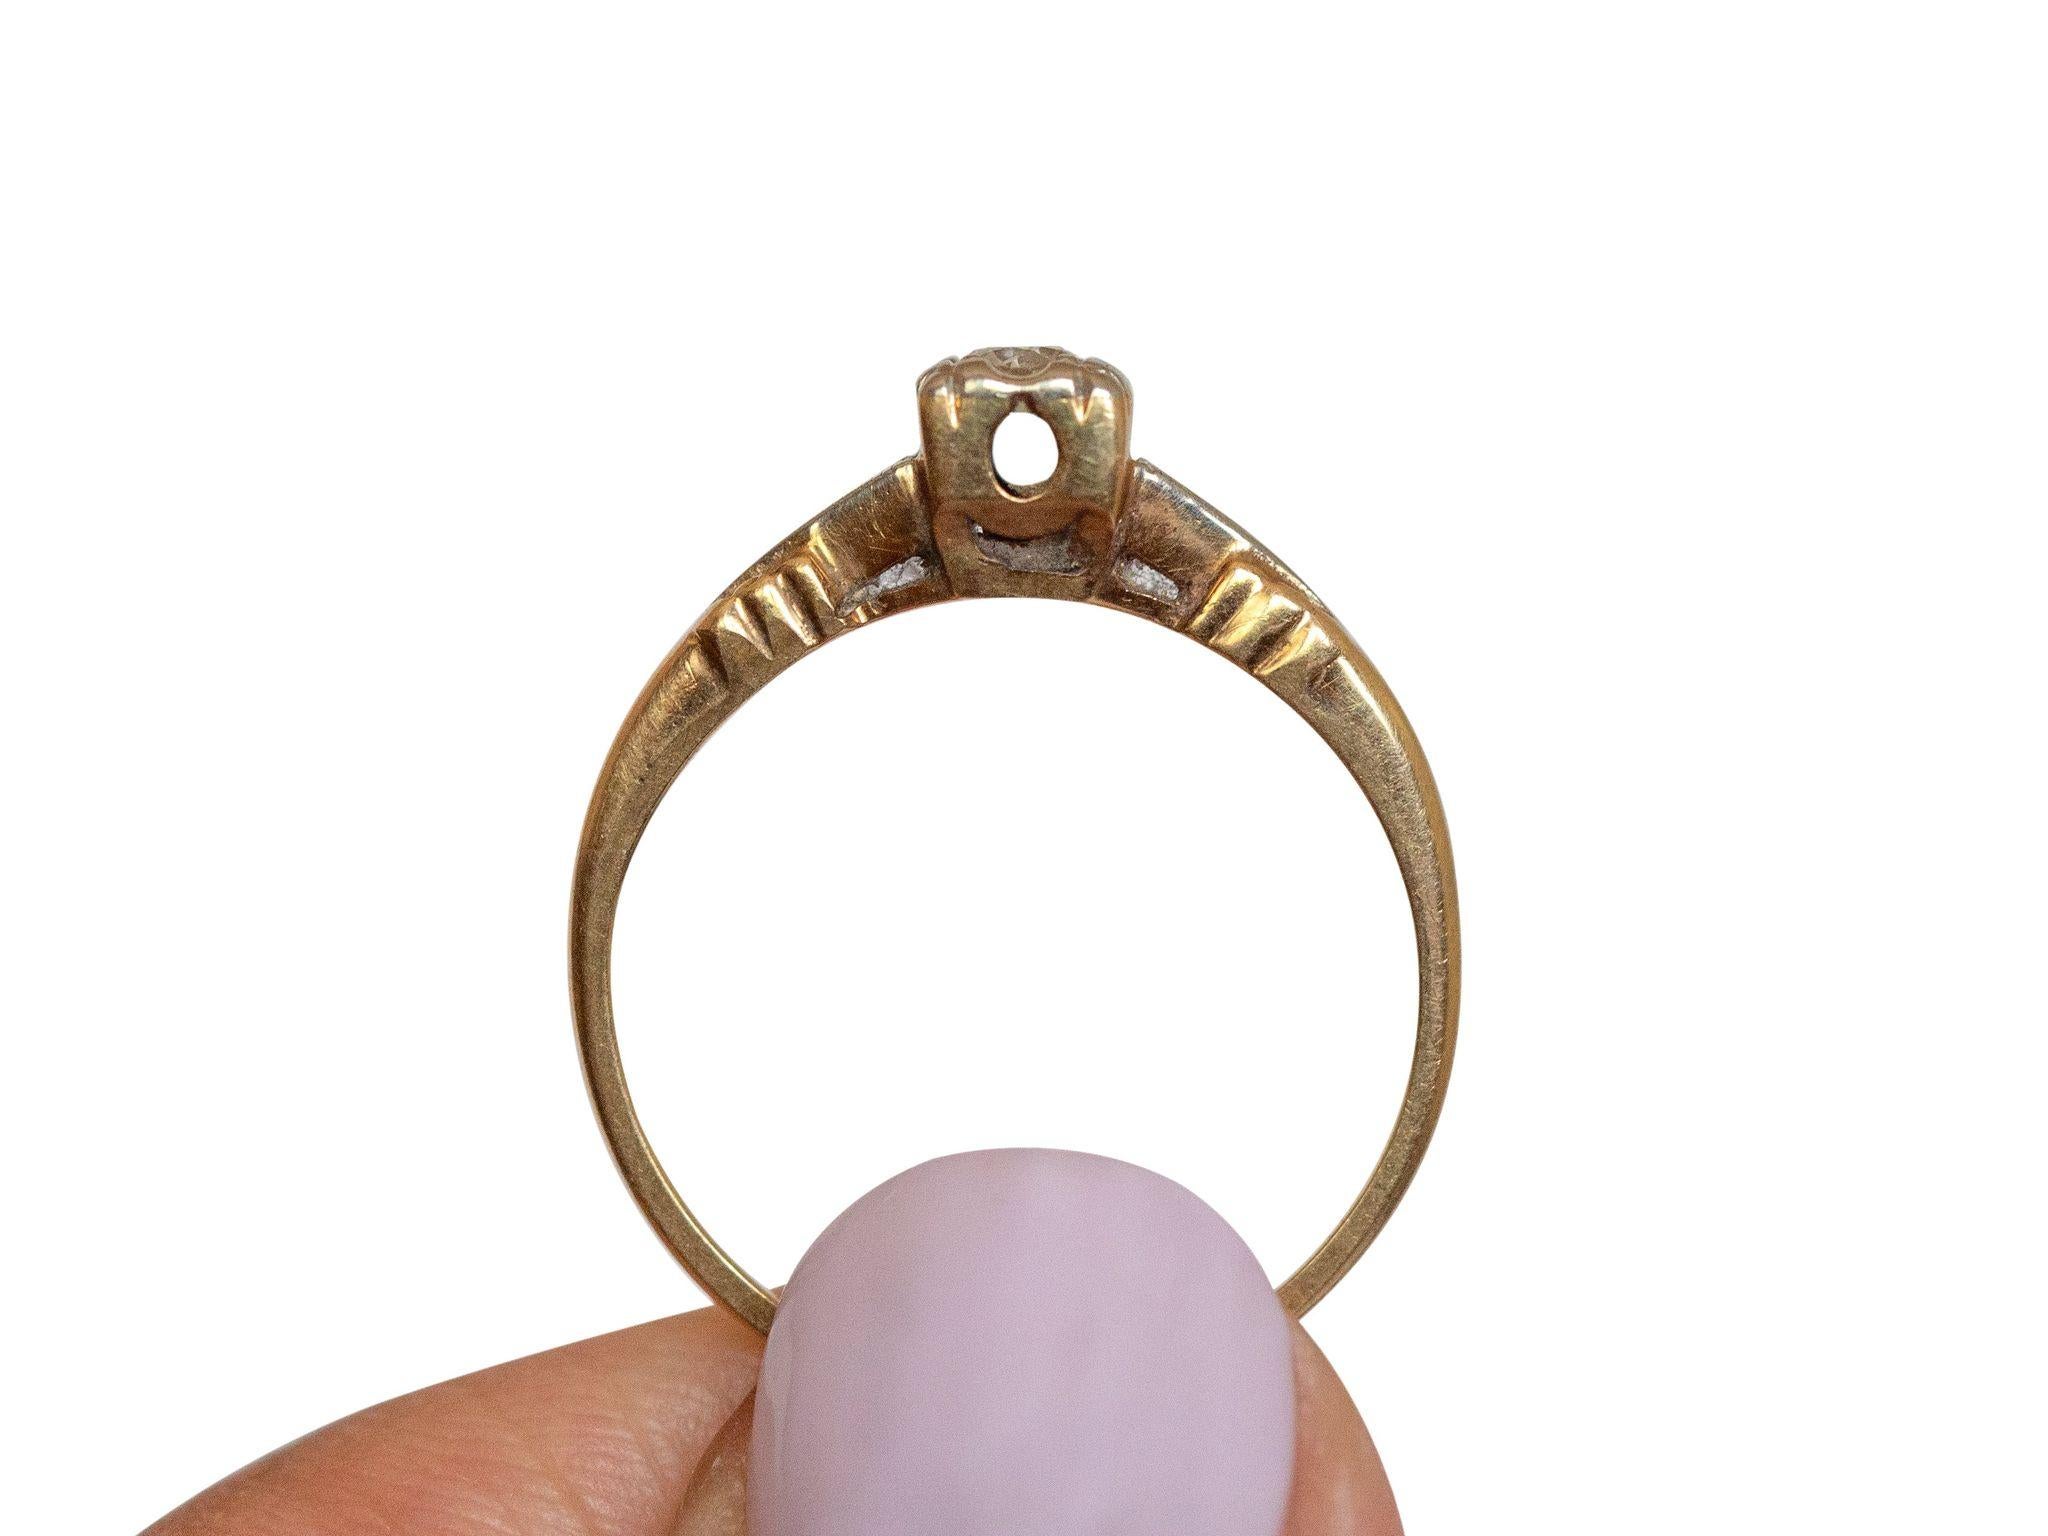 Here we have an beautiful example of a 1940's 14k yellow gold engagement ring that features a beautiful .10 ct diamond set beautifully in a simple yet elegant band. The detailed carving on the shoulder of the ring adds an eye catching effect. This